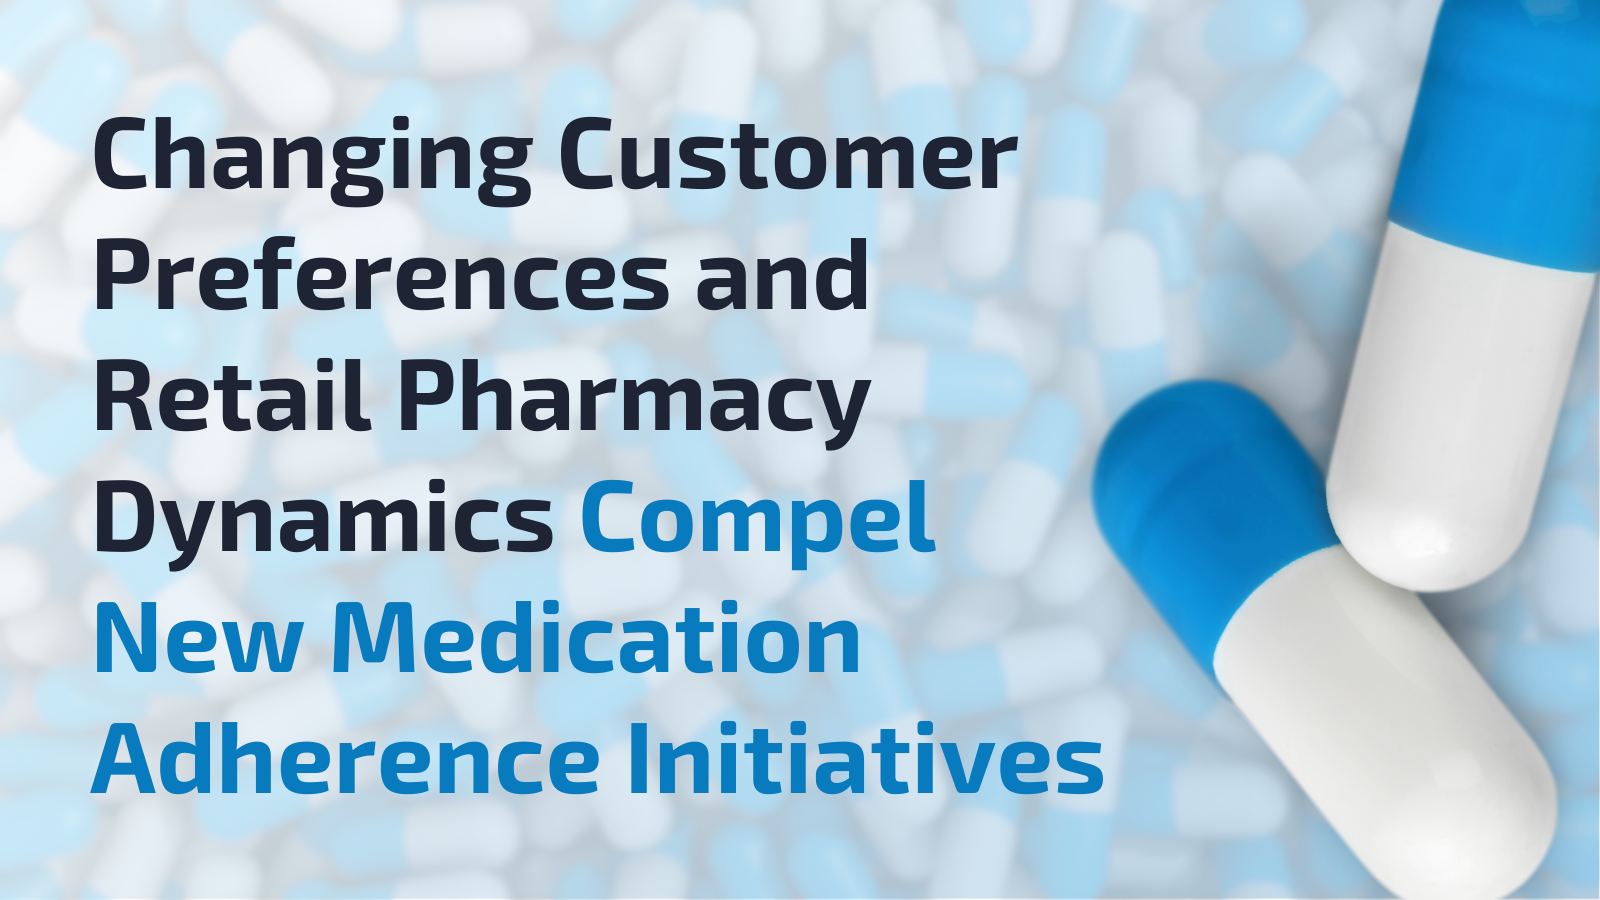 Changing Customer Preferences and Retail Pharmacy Dynamics Compel New Medication Adherence Initiatives